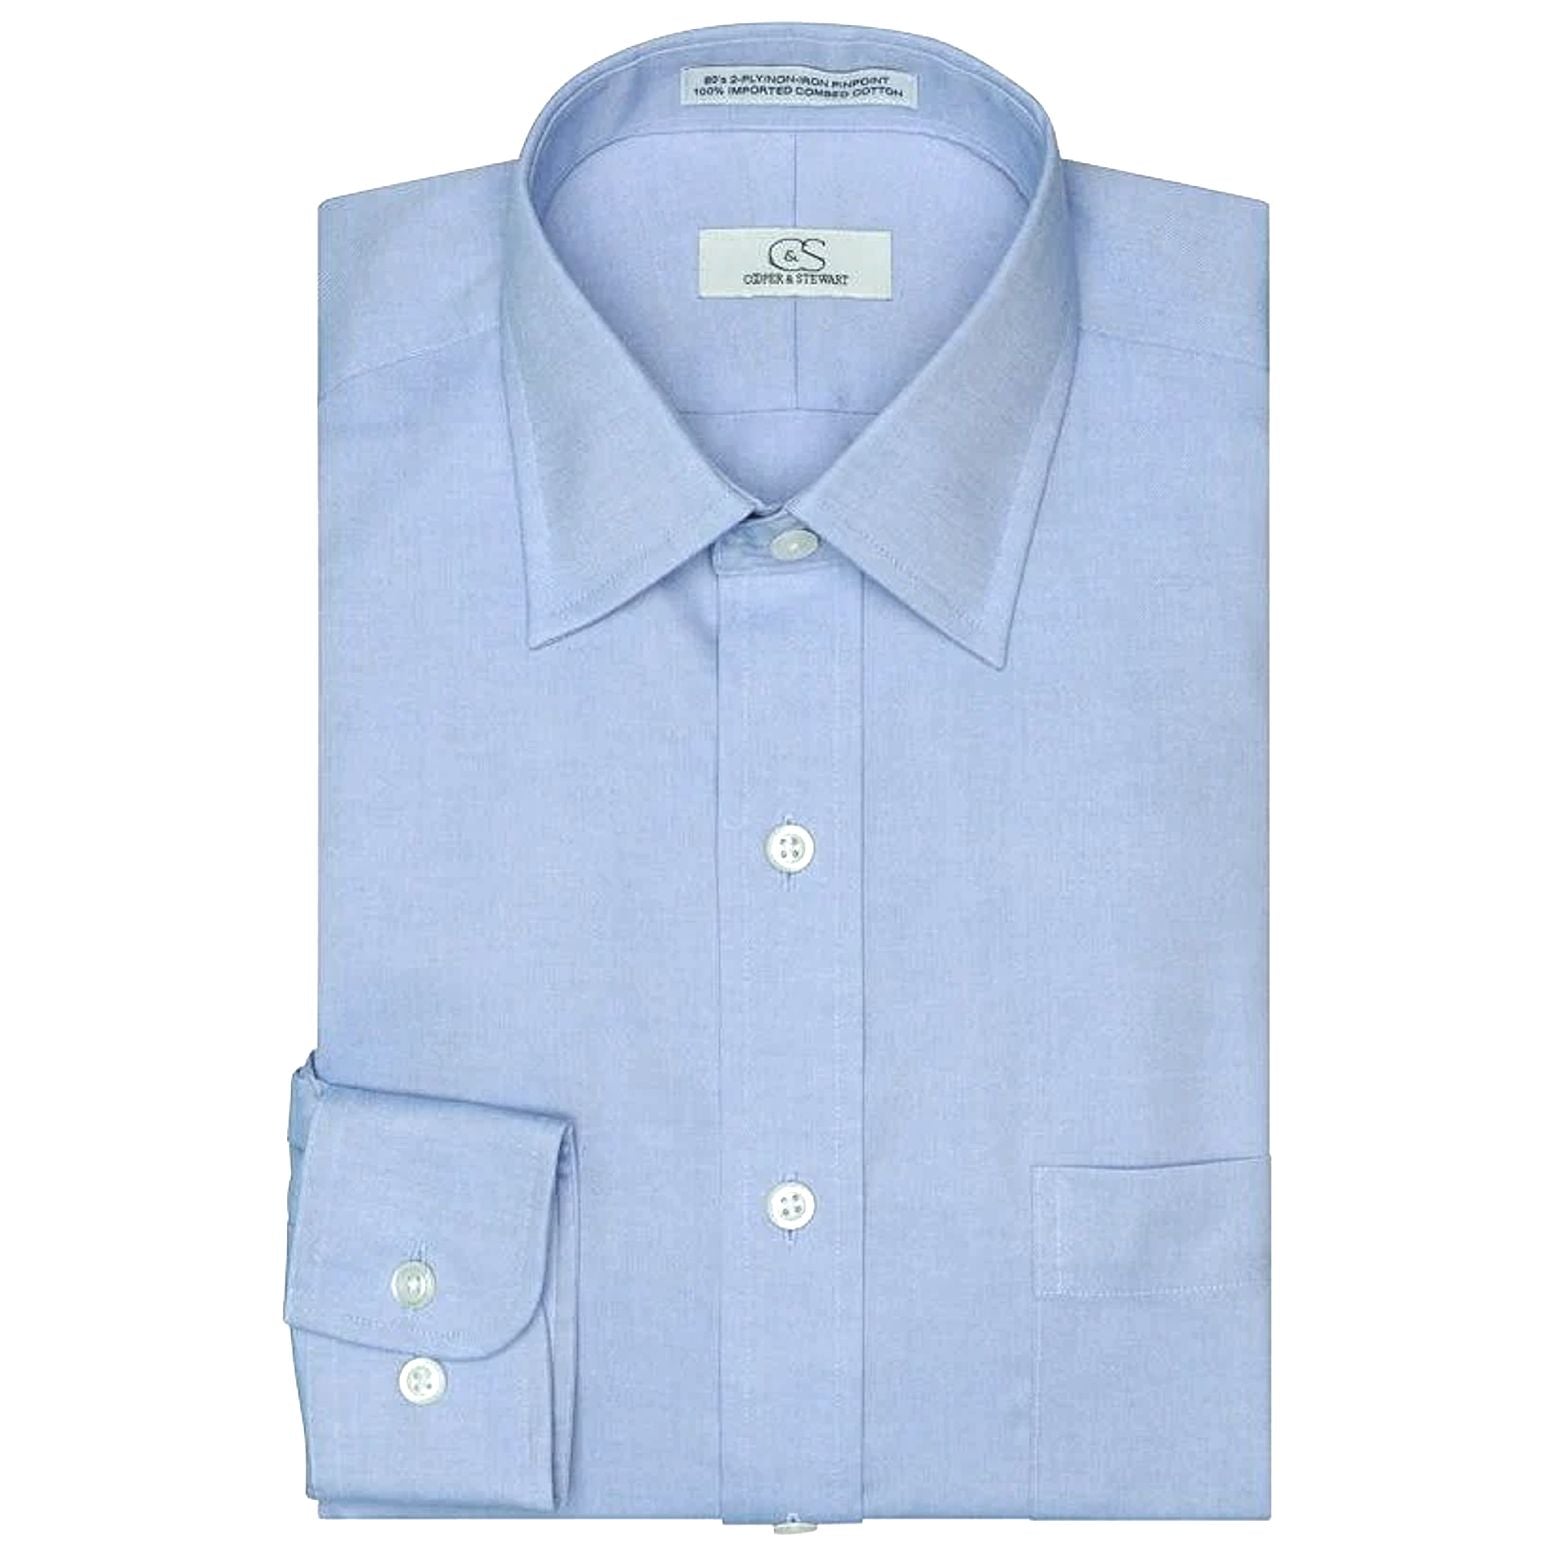 by Oxford Shirt Pinpoint - Classic The Cotton Blue Dress Wrinkle-Free